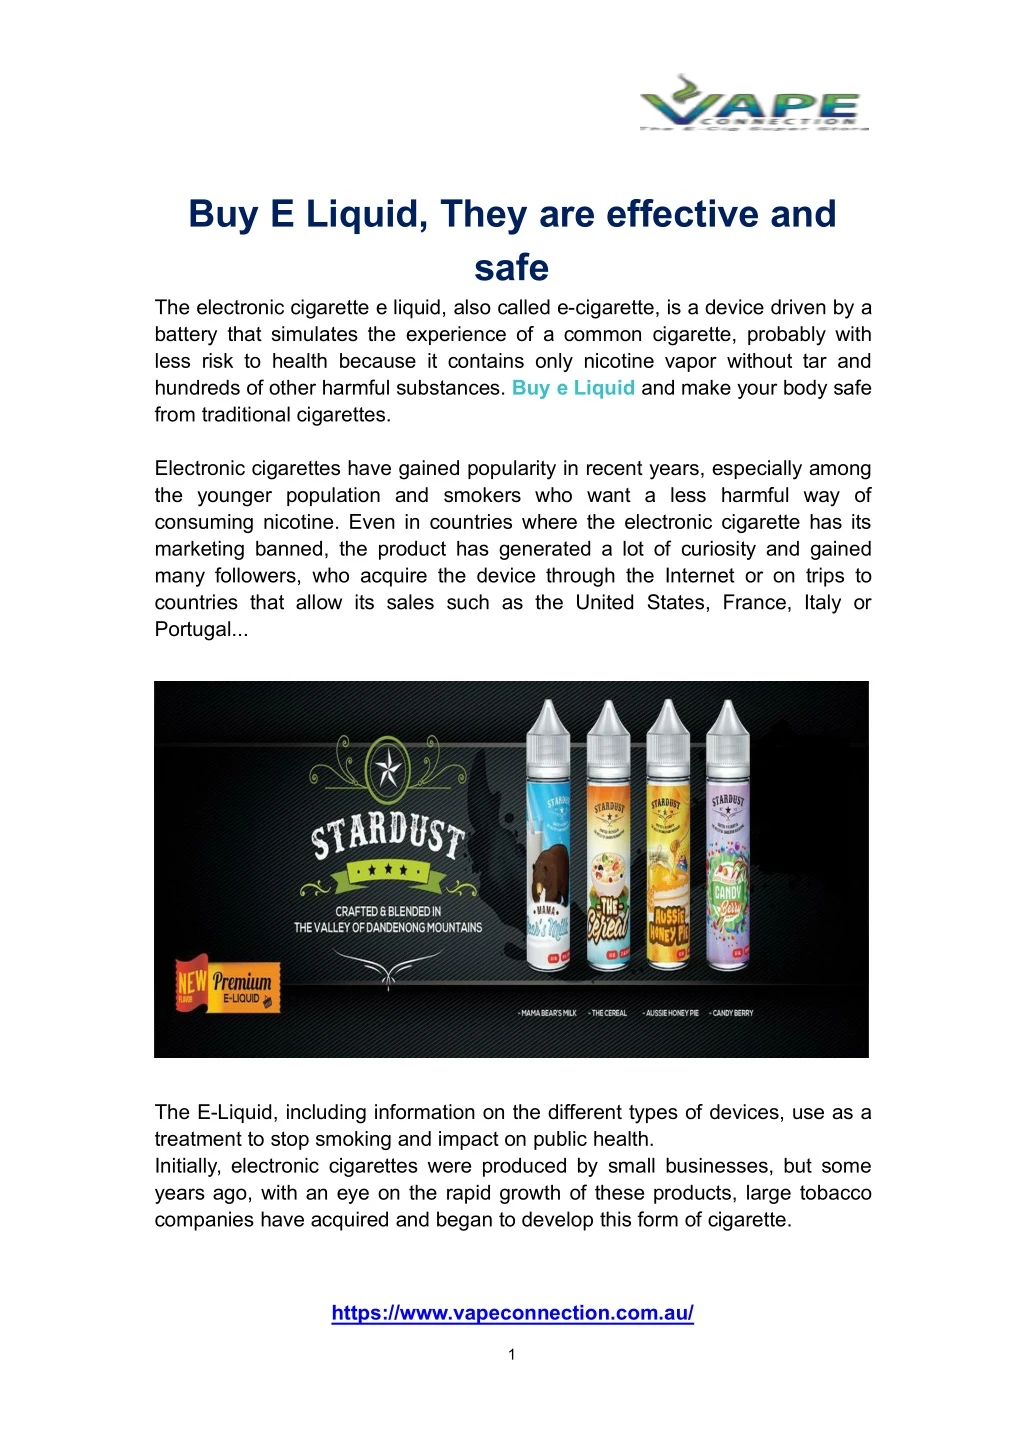 buy e liquid they are effective and safe